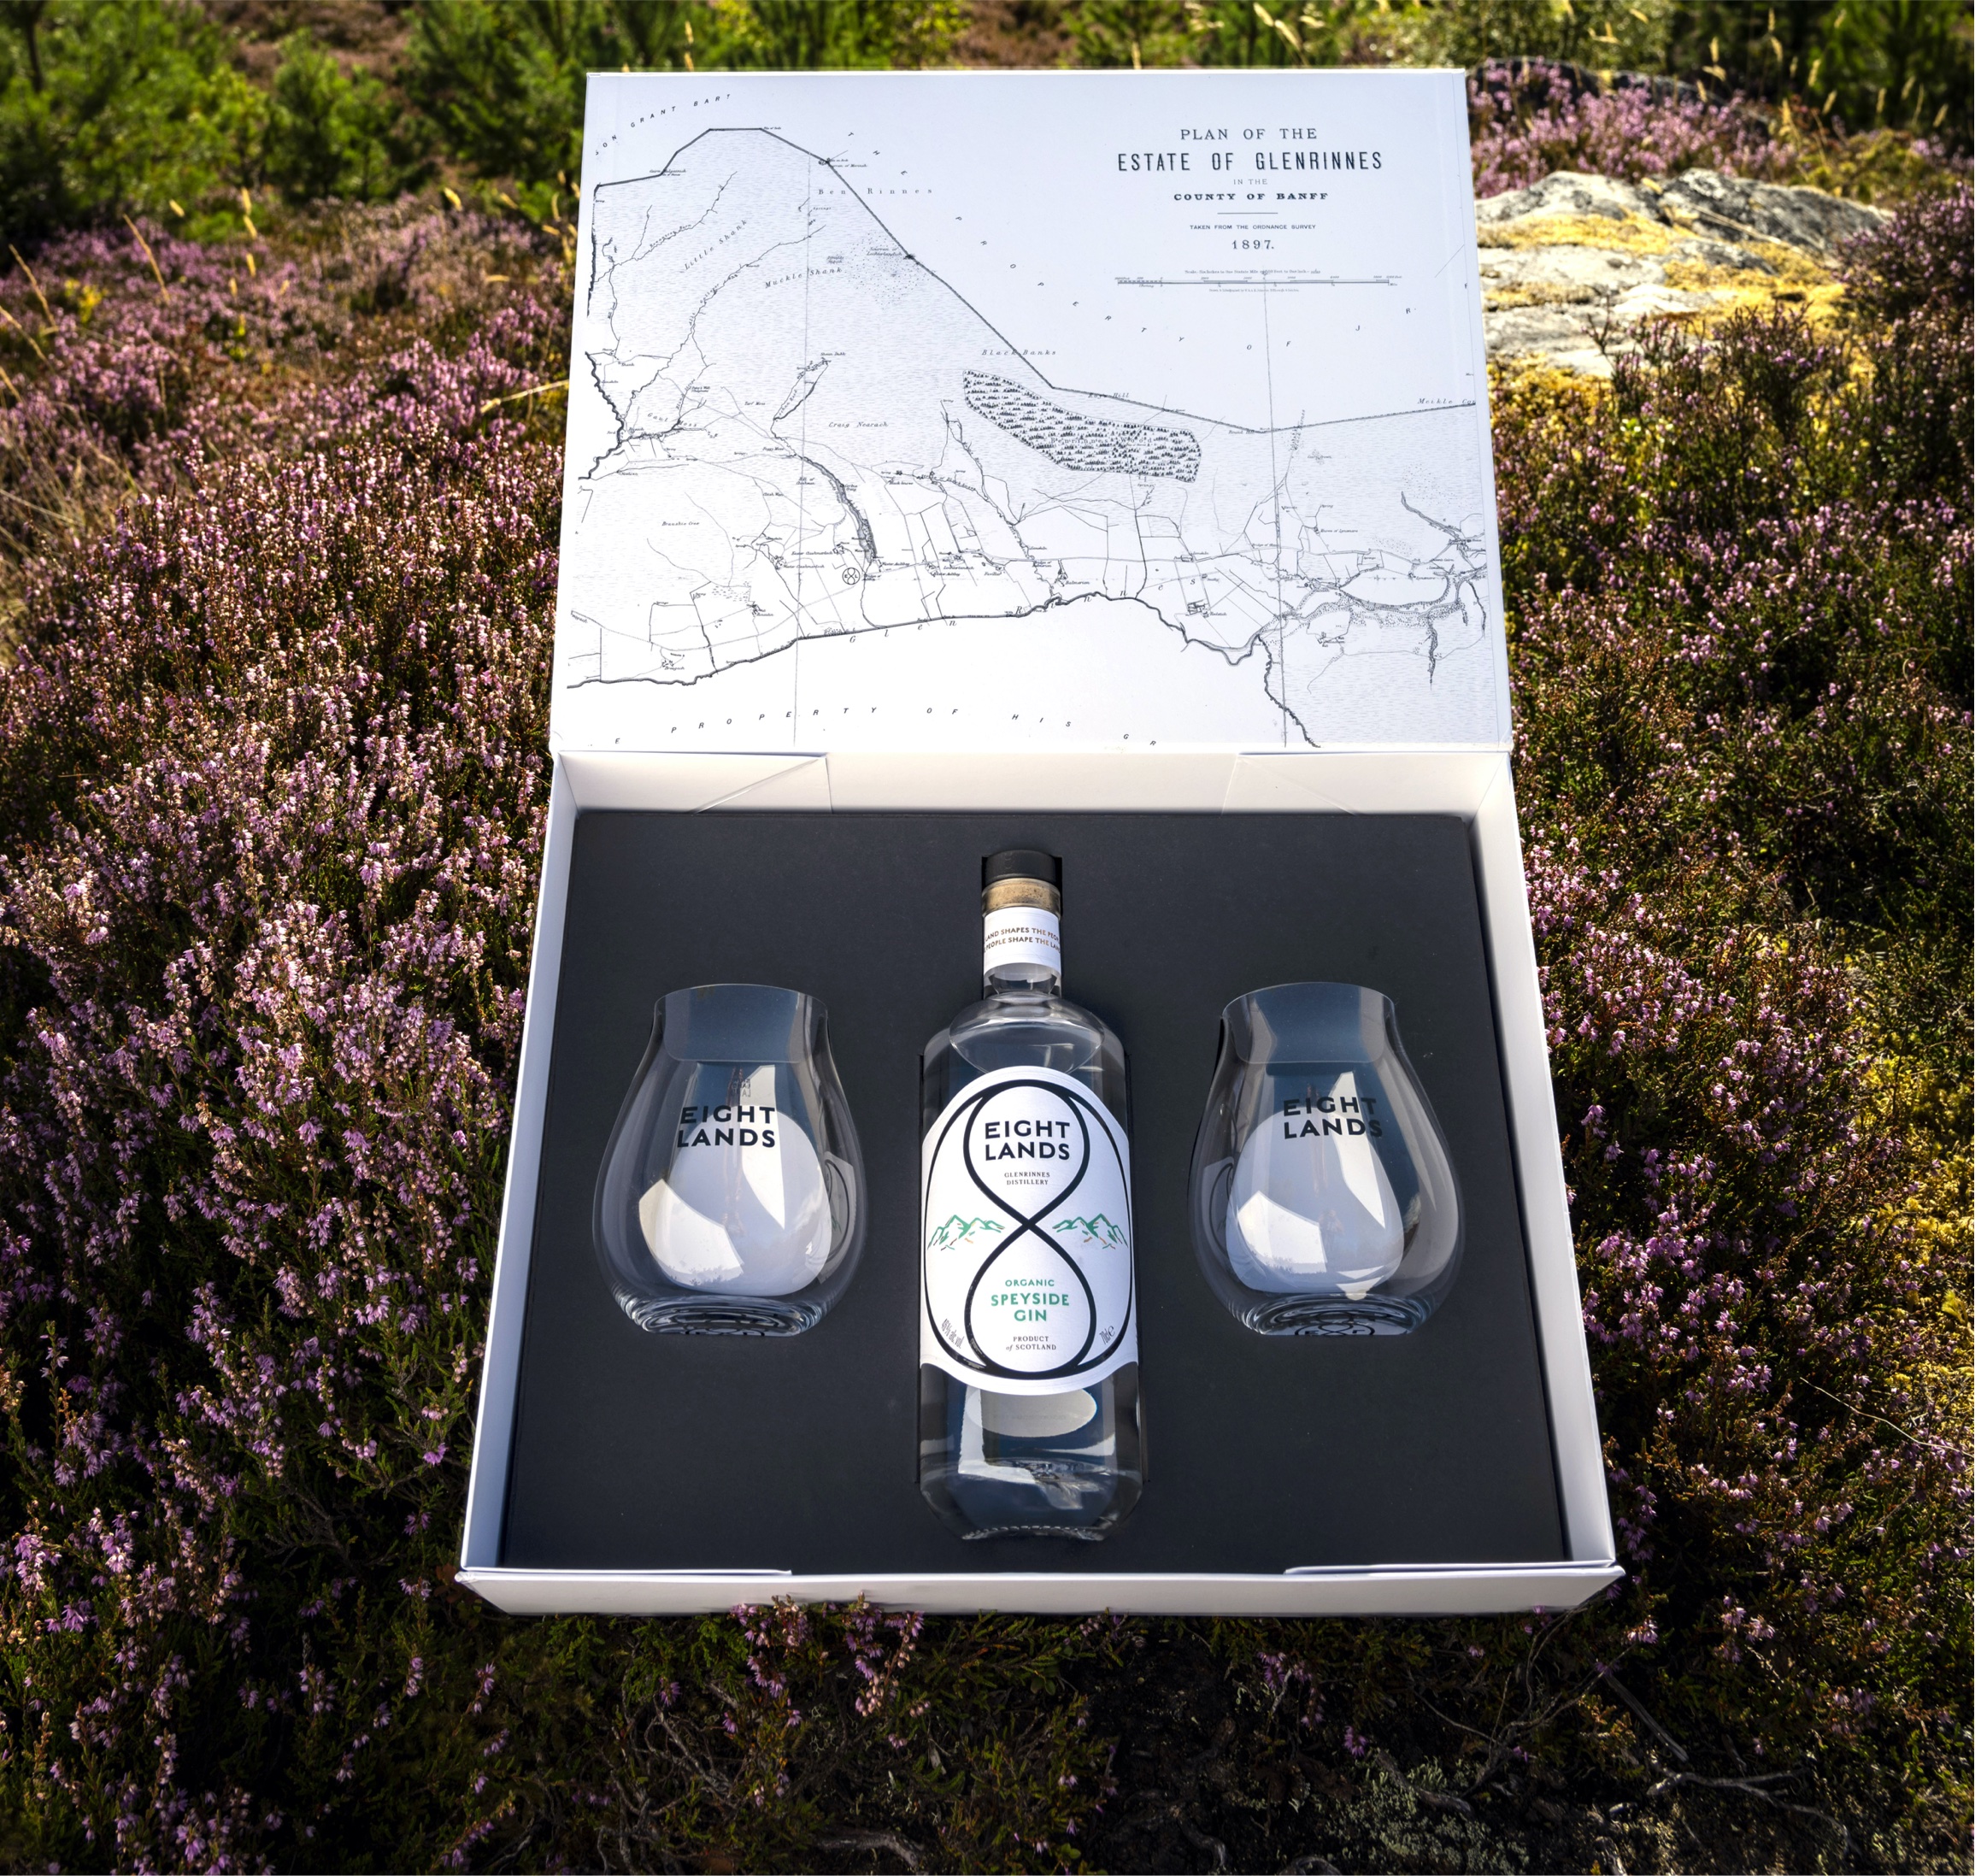 Eight Lands launches exclusive Vodka and Gin gift sets with Riedel glassware for Christmas